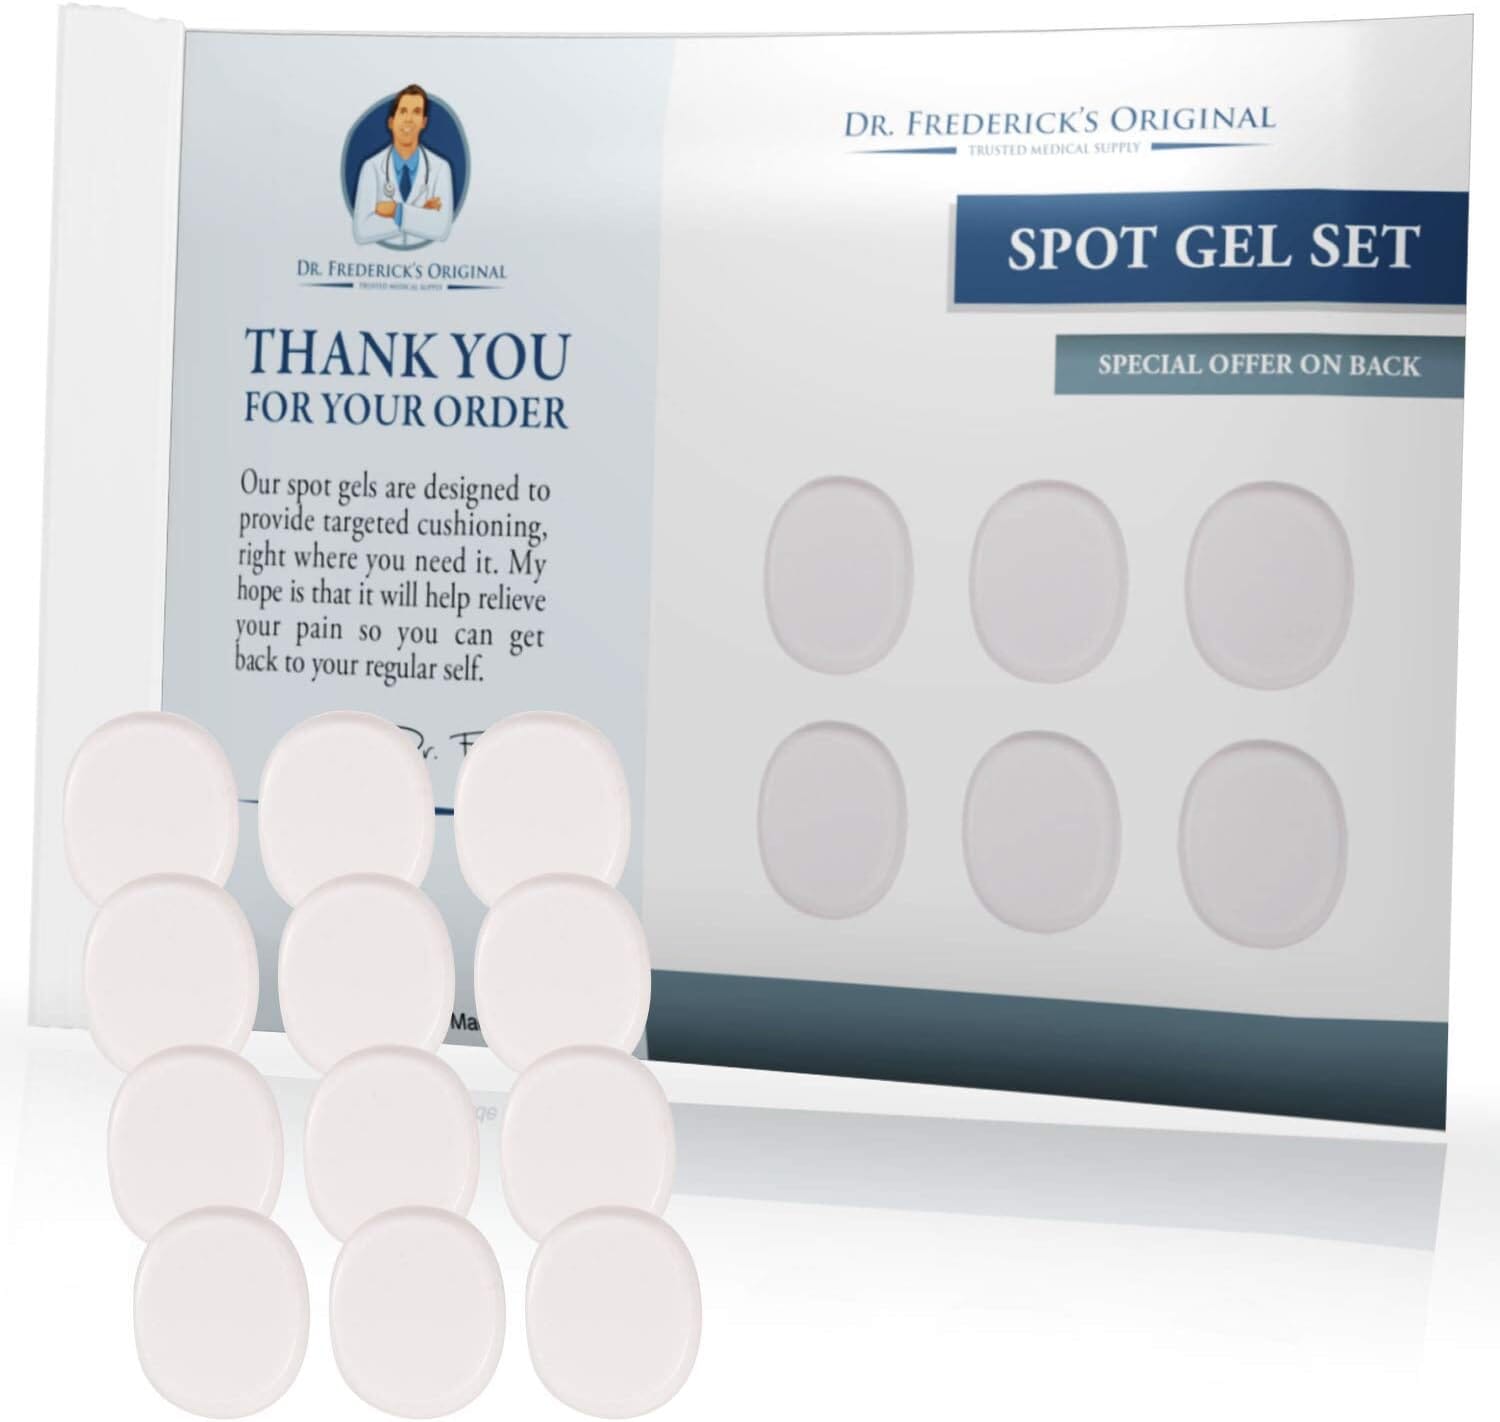 Dr. Frederick's Original Spot Gel Blister Pads - 12 Pieces - Relieve Pain from Calluses, Bunions, Corns, Ill-Fitting Shoes - Adhesive Gel Pads to Protect Your Feet Foot Pain Dr. Frederick's Original 